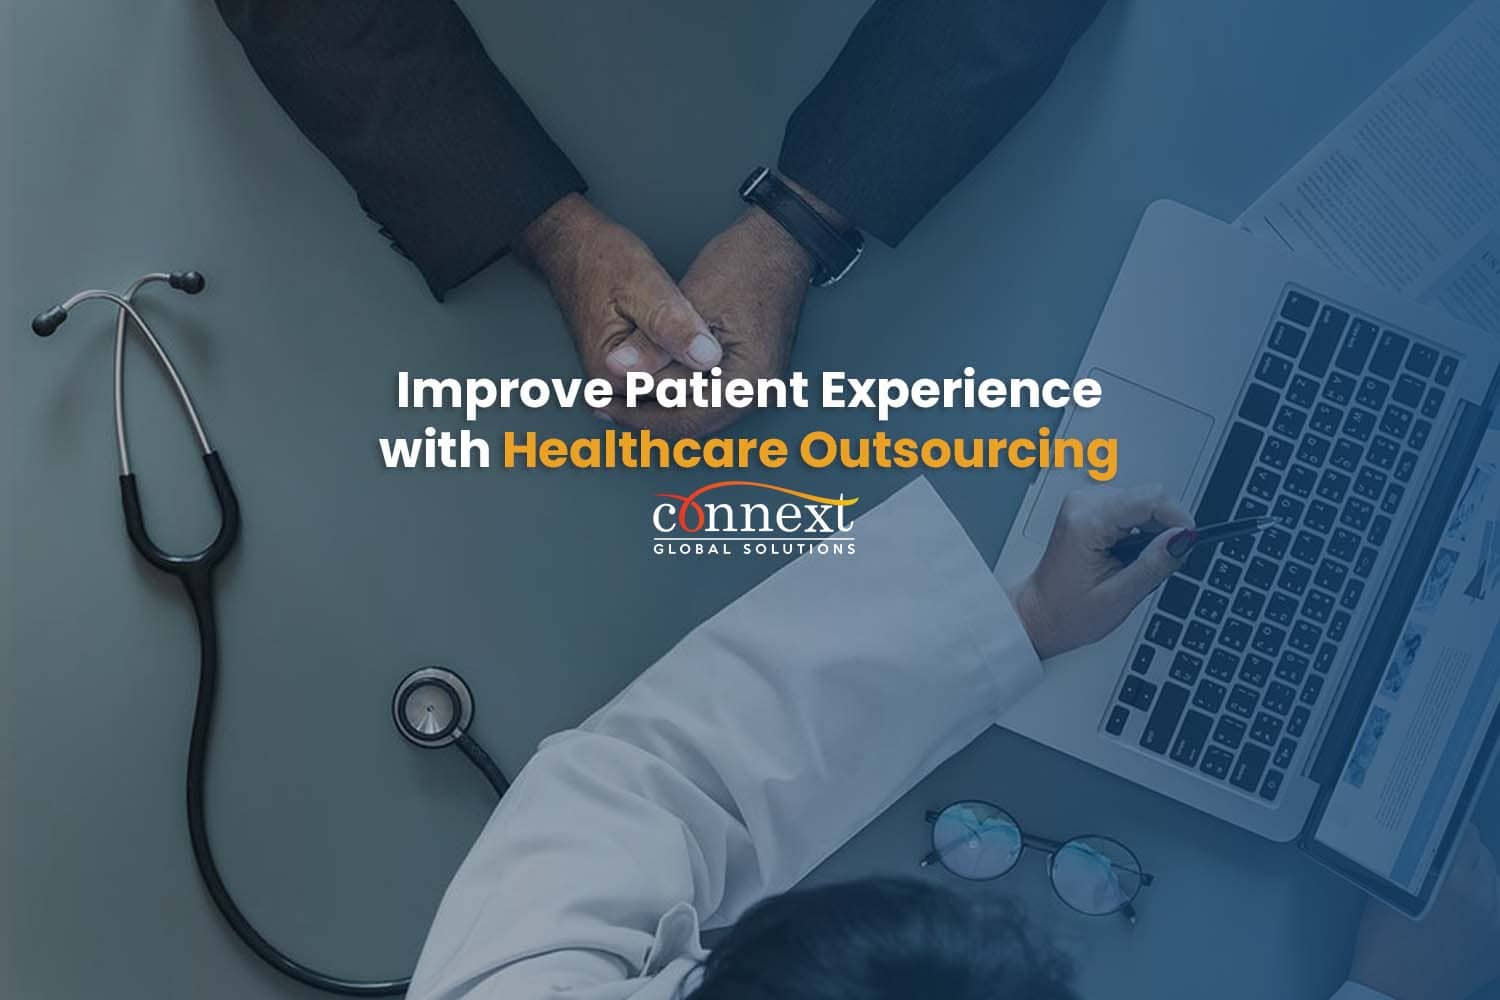 Improve Patient Experience with Healthcare Outsourcing